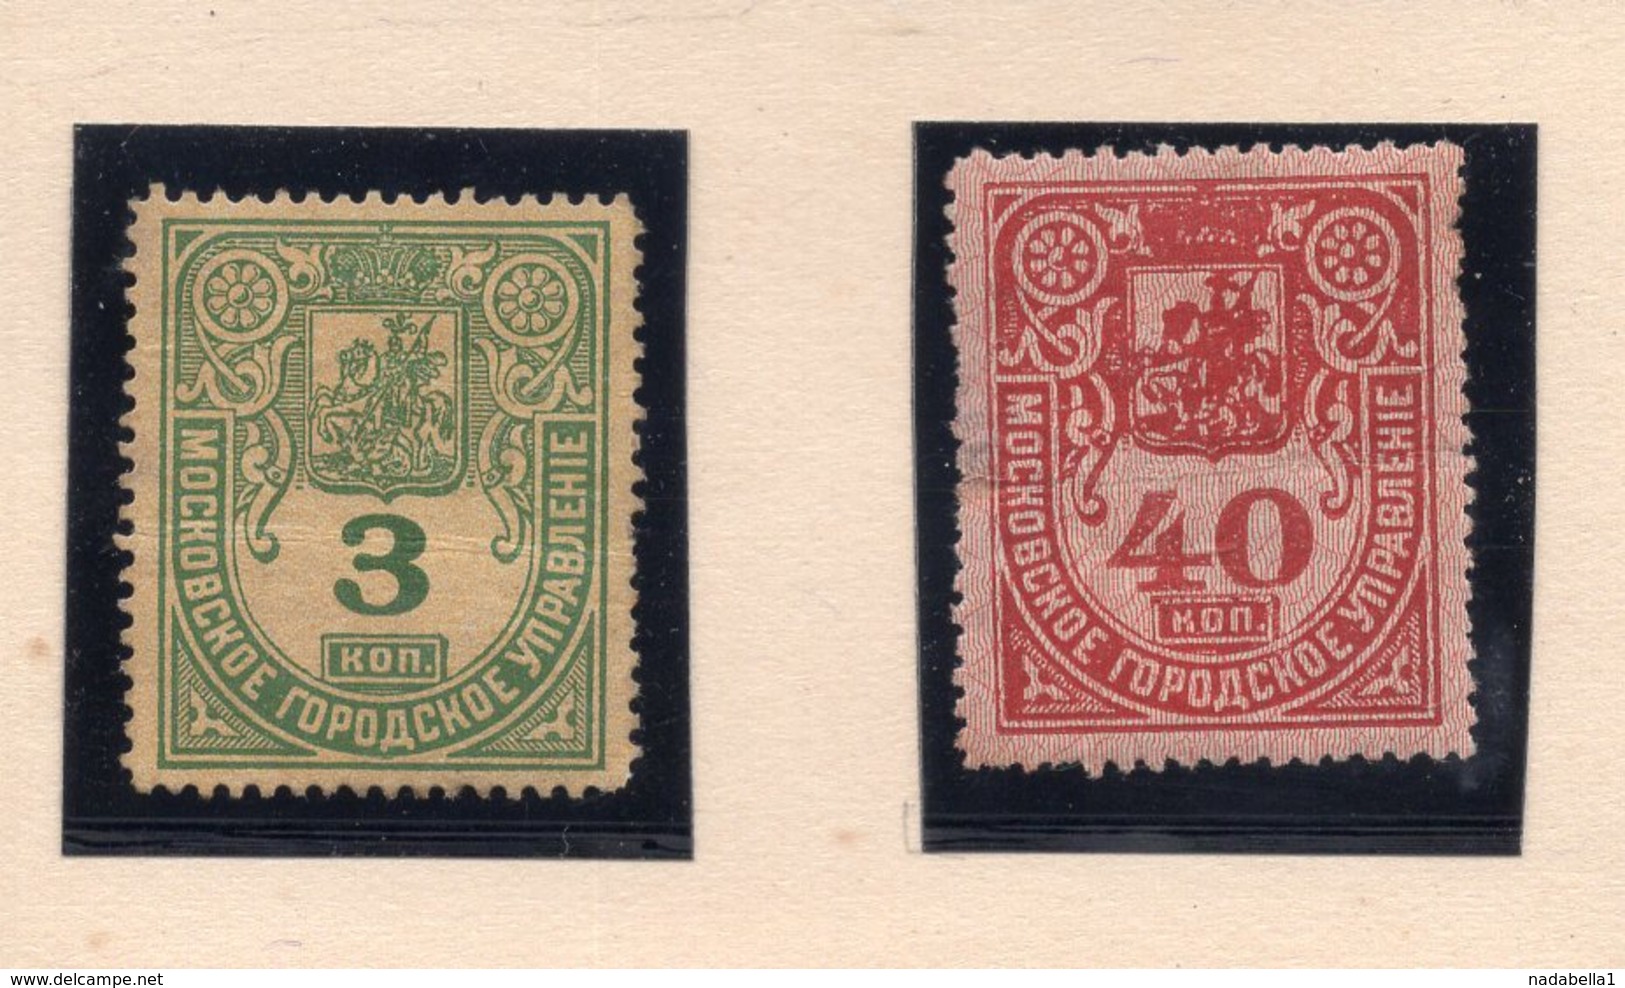 RUSSIA, MOSCOW, MUNICIPAL REVENUE STAMPS, 3 & 40 KOPEIKA, MH - Revenue Stamps